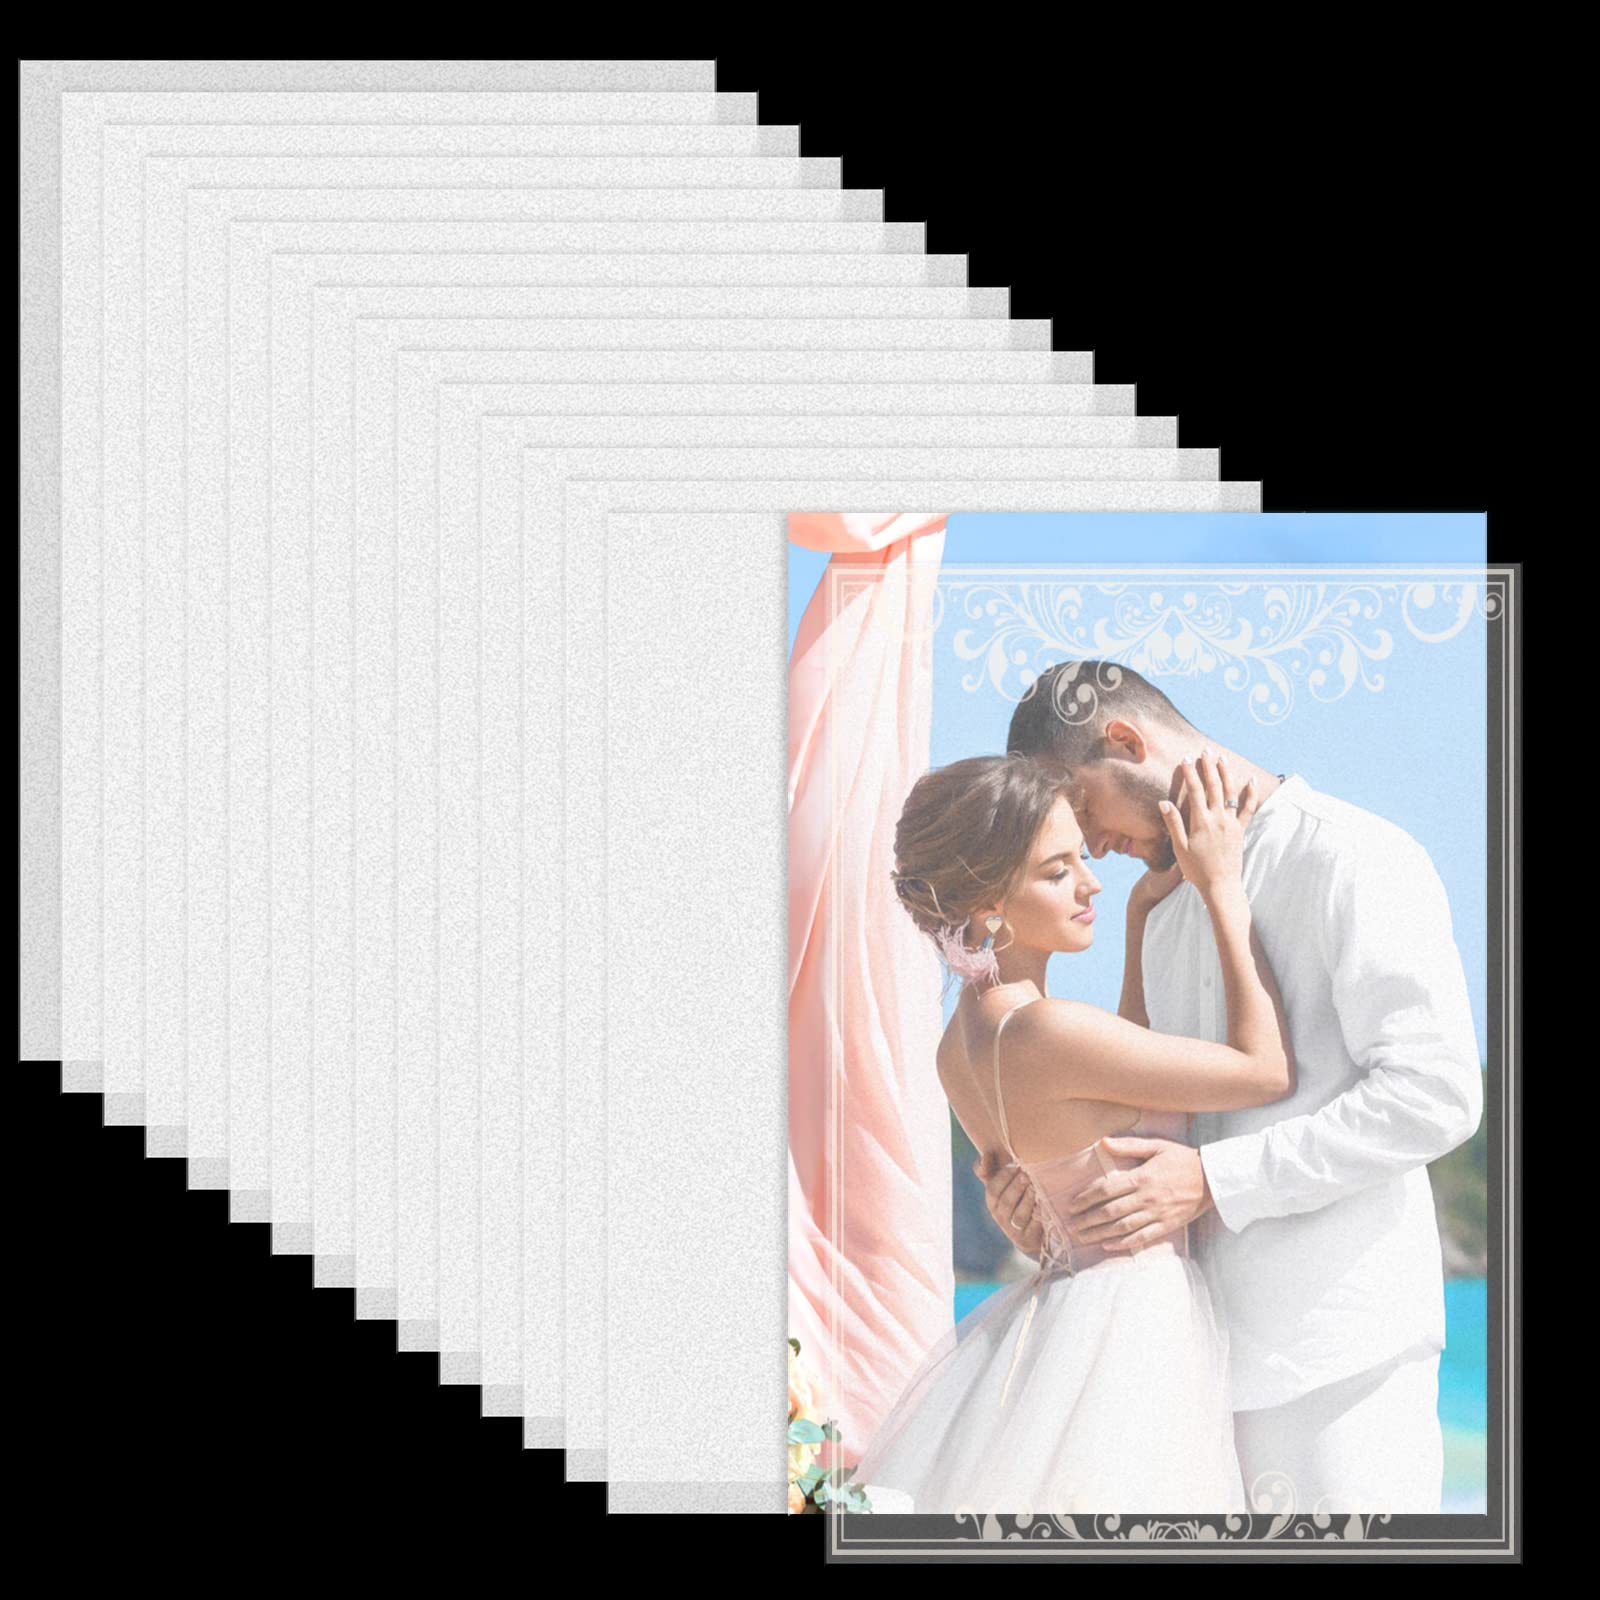 Clear Wedding Save The Date Cards